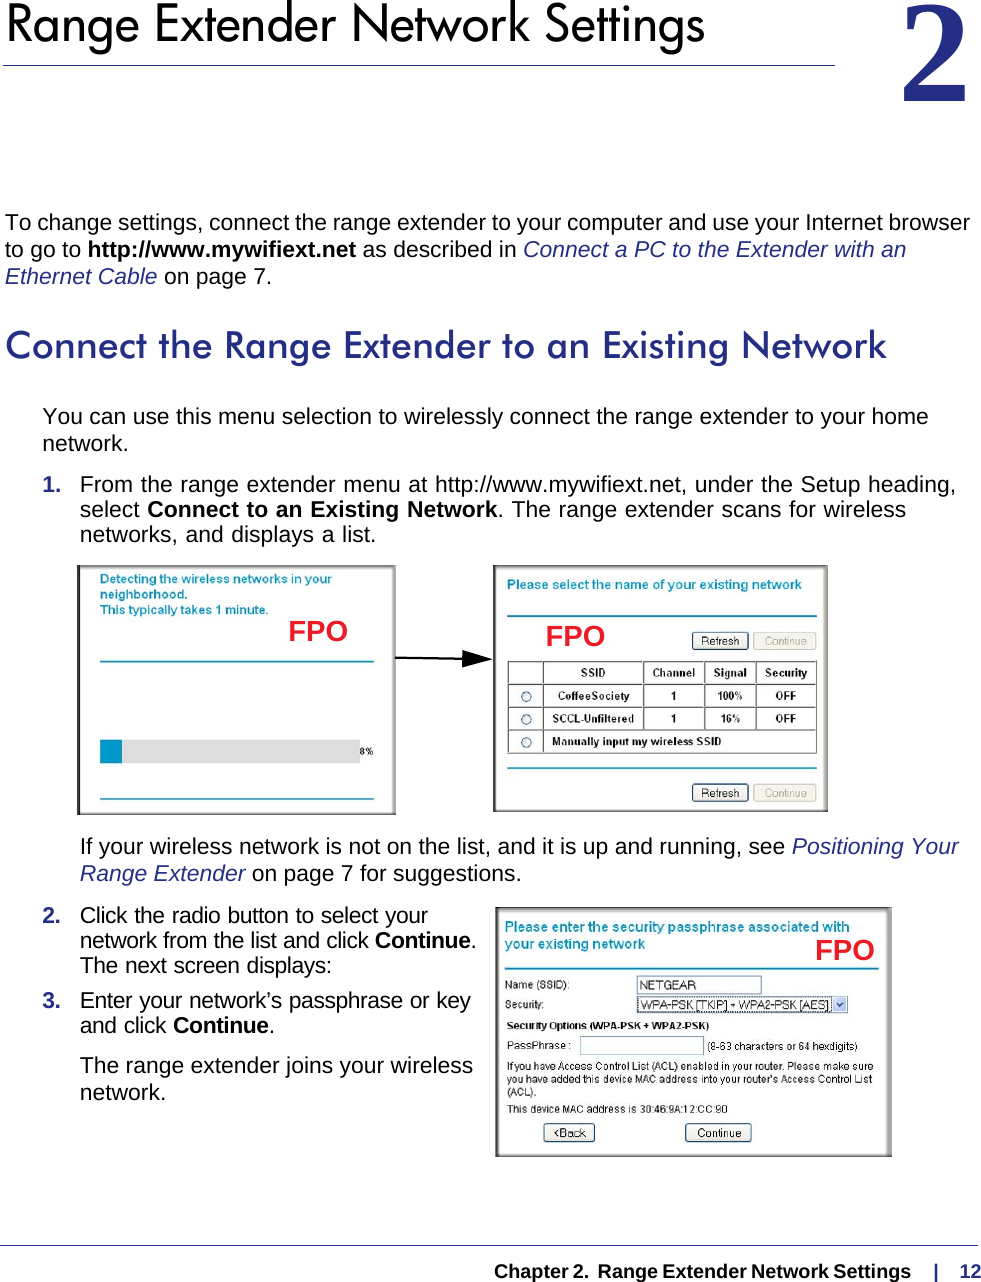   Chapter 2.  Range Extender Network Settings     |    1222.   Range Extender Network SettingsTo change settings, connect the range extender to your computer and use your Internet browser to go to http://www.mywifiext.net as described in Connect a PC to the Extender with an Ethernet Cable on page  7. Connect the Range Extender to an Existing NetworkYou can use this menu selection to wirelessly connect the range extender to your home network.1.  From the range extender menu at http://www.mywifiext.net, under the Setup heading, select Connect to an Existing Network. The range extender scans for wireless networks, and displays a list.FPO FPOIf your wireless network is not on the list, and it is up and running, see Positioning Your Range Extender on page  7 for suggestions.2.  Click the radio button to select your network from the list and click Continue. The next screen displays: FPO3.  Enter your network’s passphrase or key and click Continue. The range extender joins your wireless network.